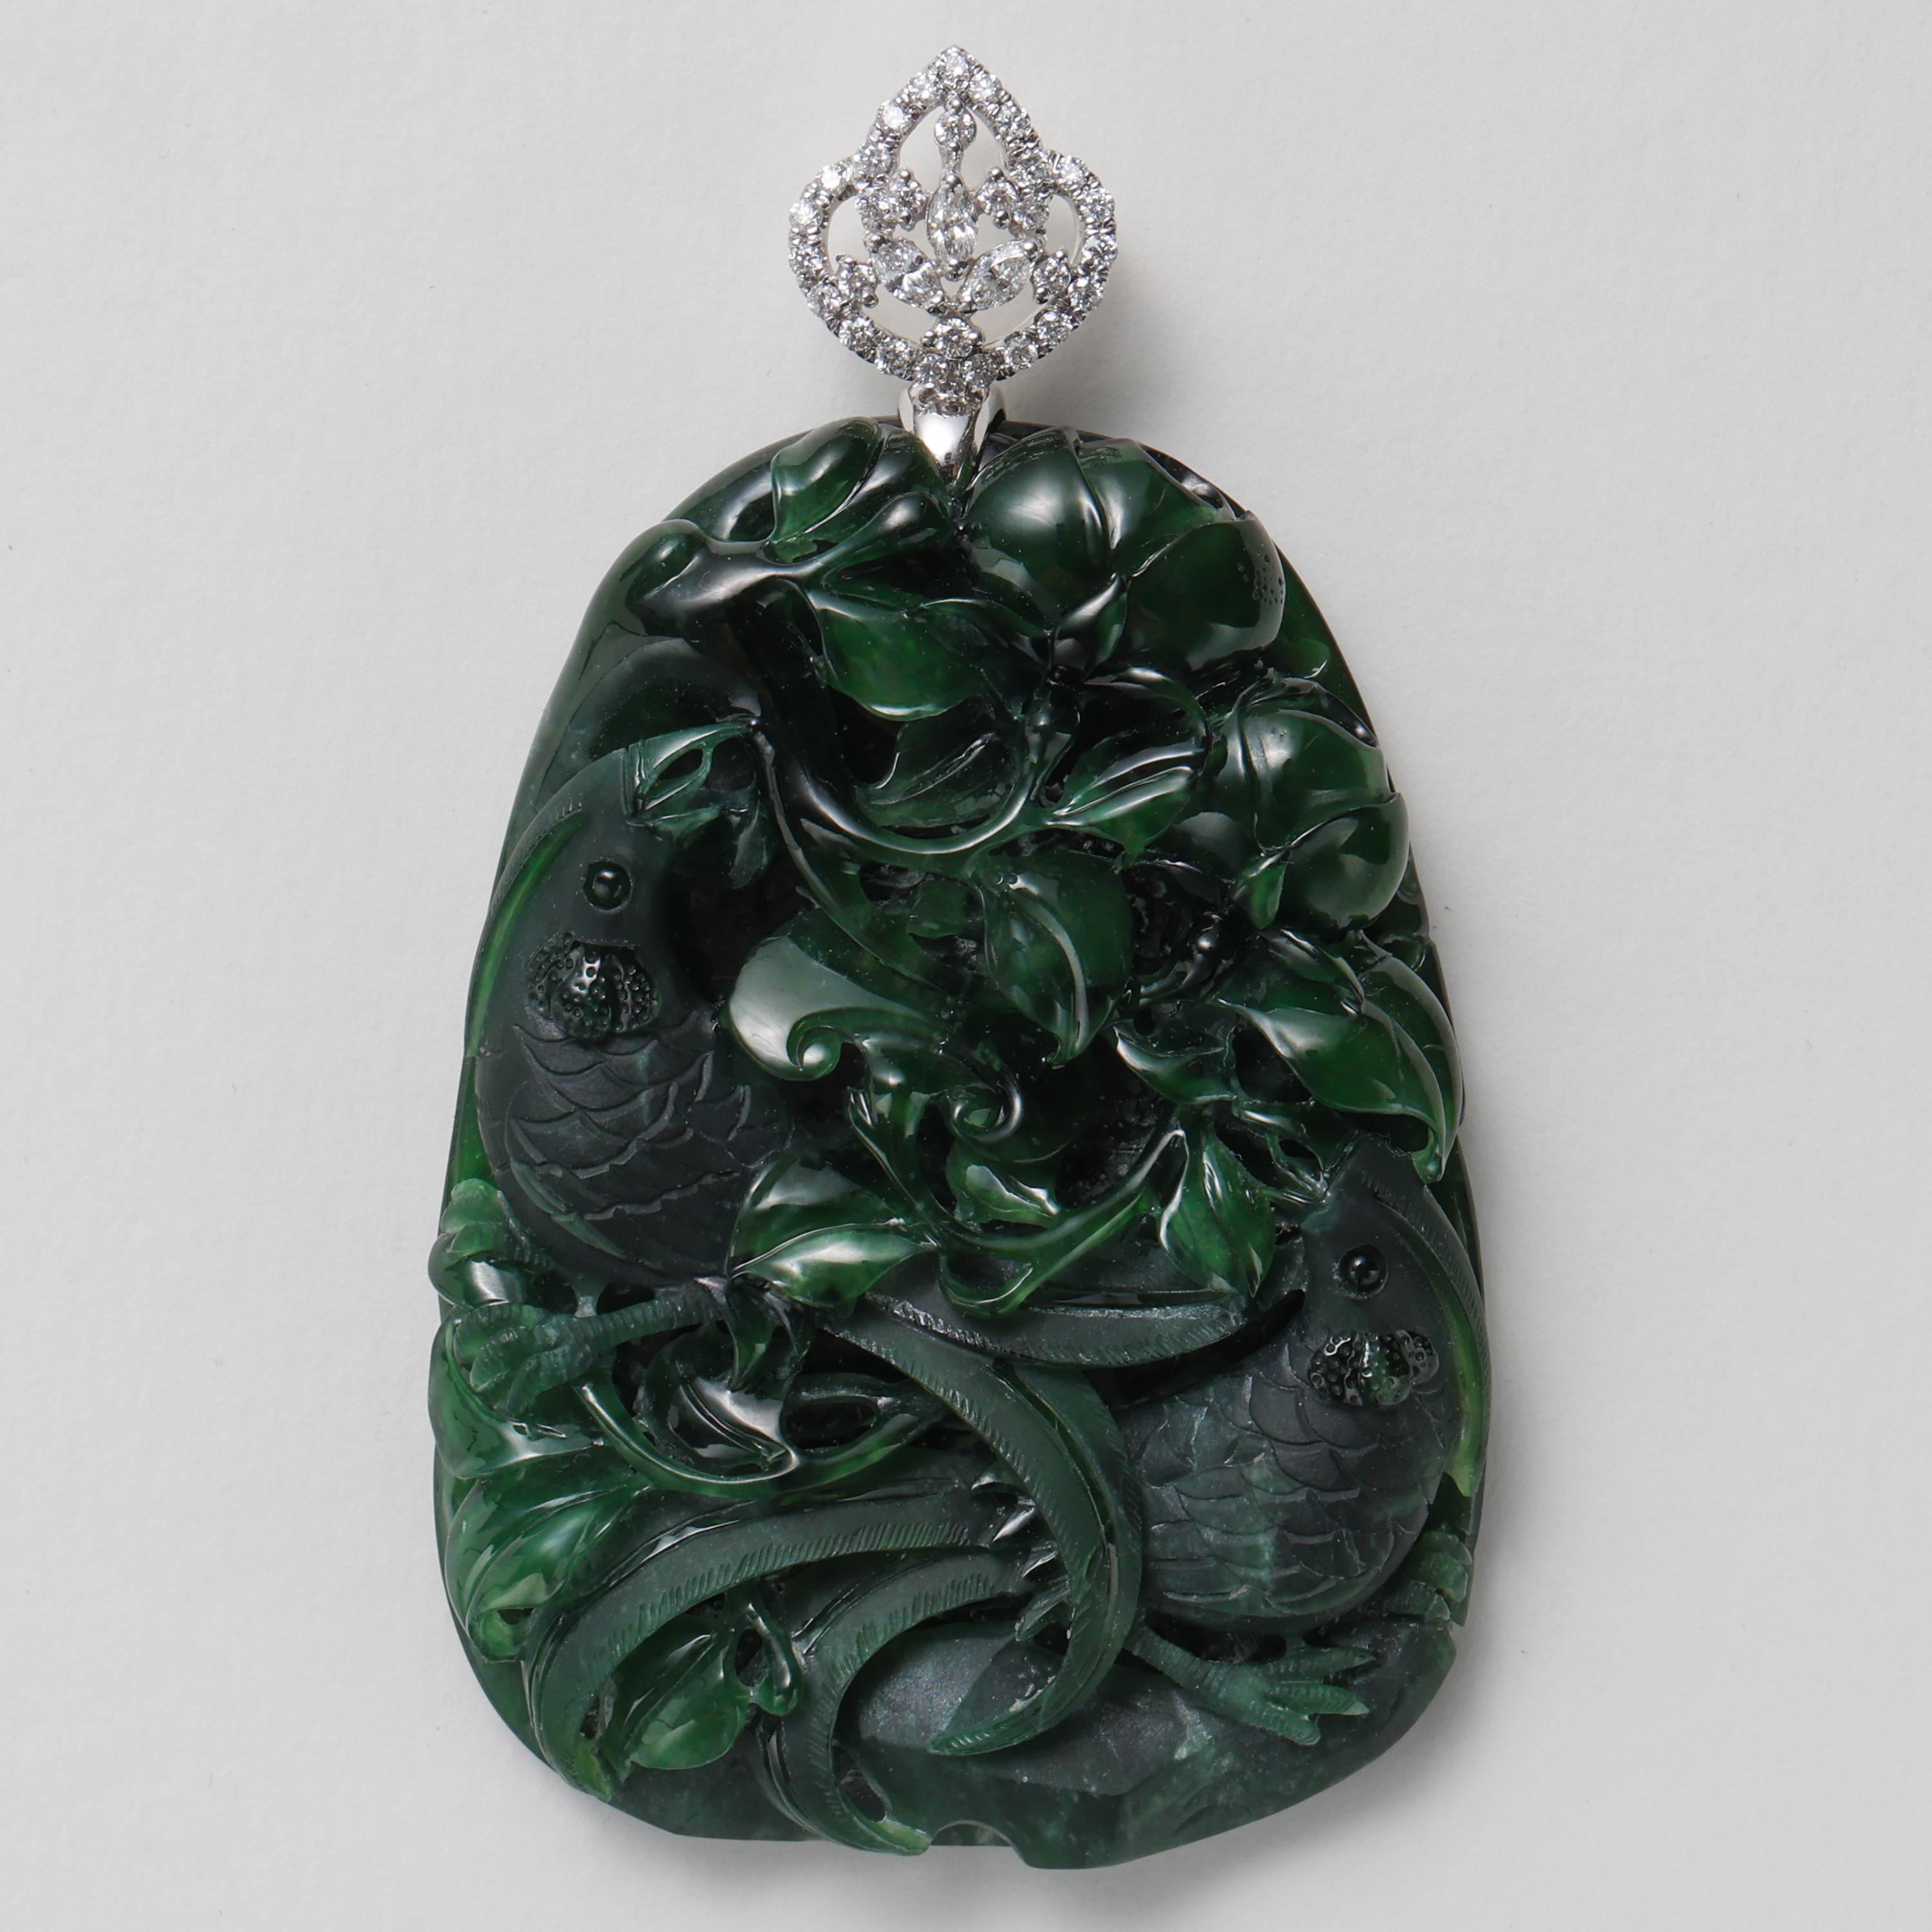 This incredible, substantial, masterfully carved natural and untreated omphacite jade (fei cui) jade pendant features three-dimensionally carved birds nestled among highly detailed wide blades of grass, while coyly discrete ruyi (mushroom) are